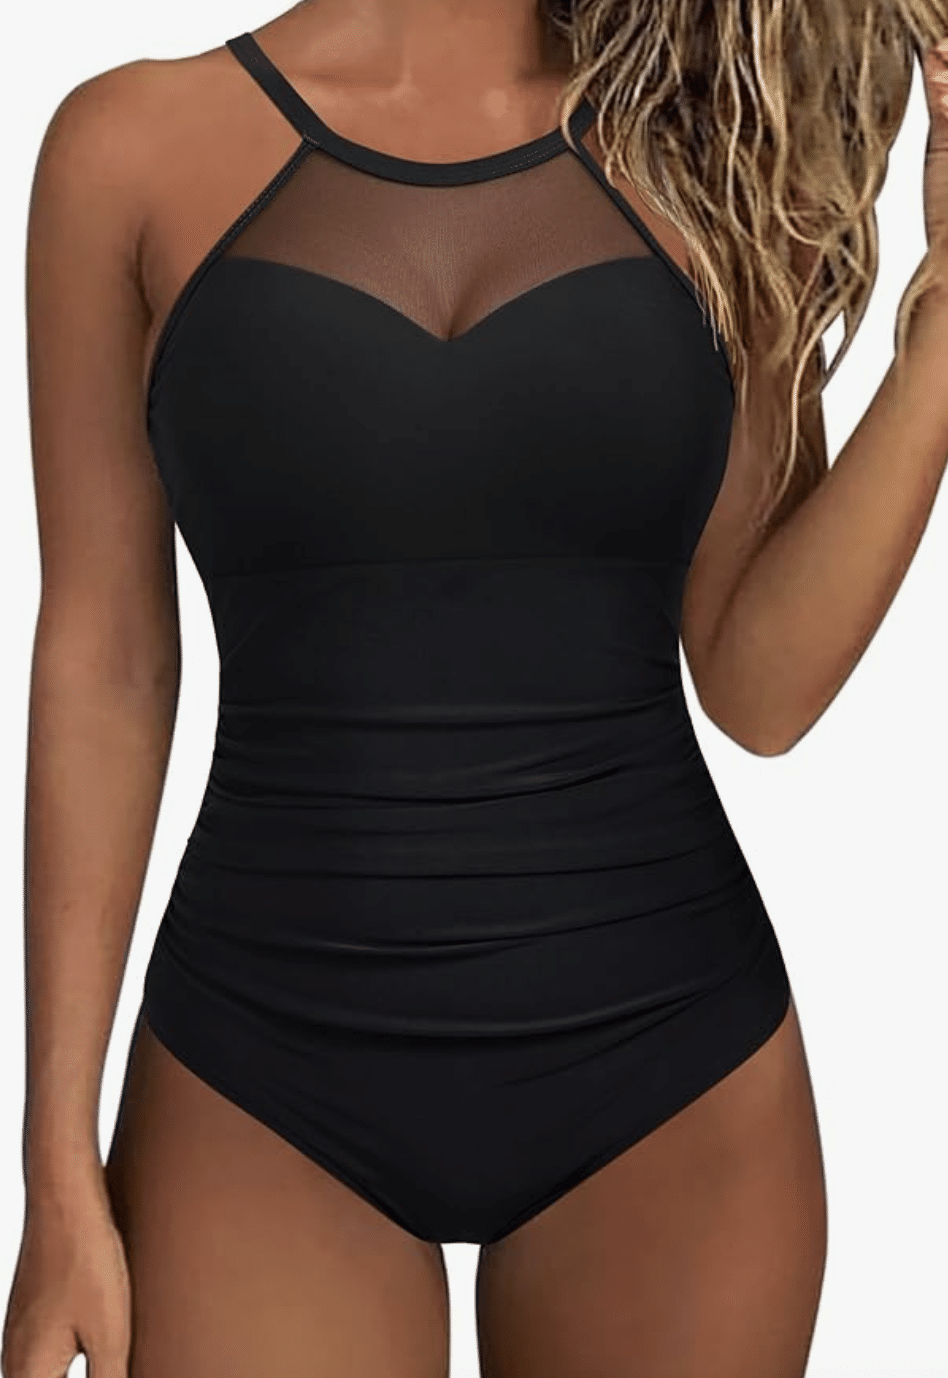 Picture of a woman wearing a black one piece swim suit with mesh at the top.